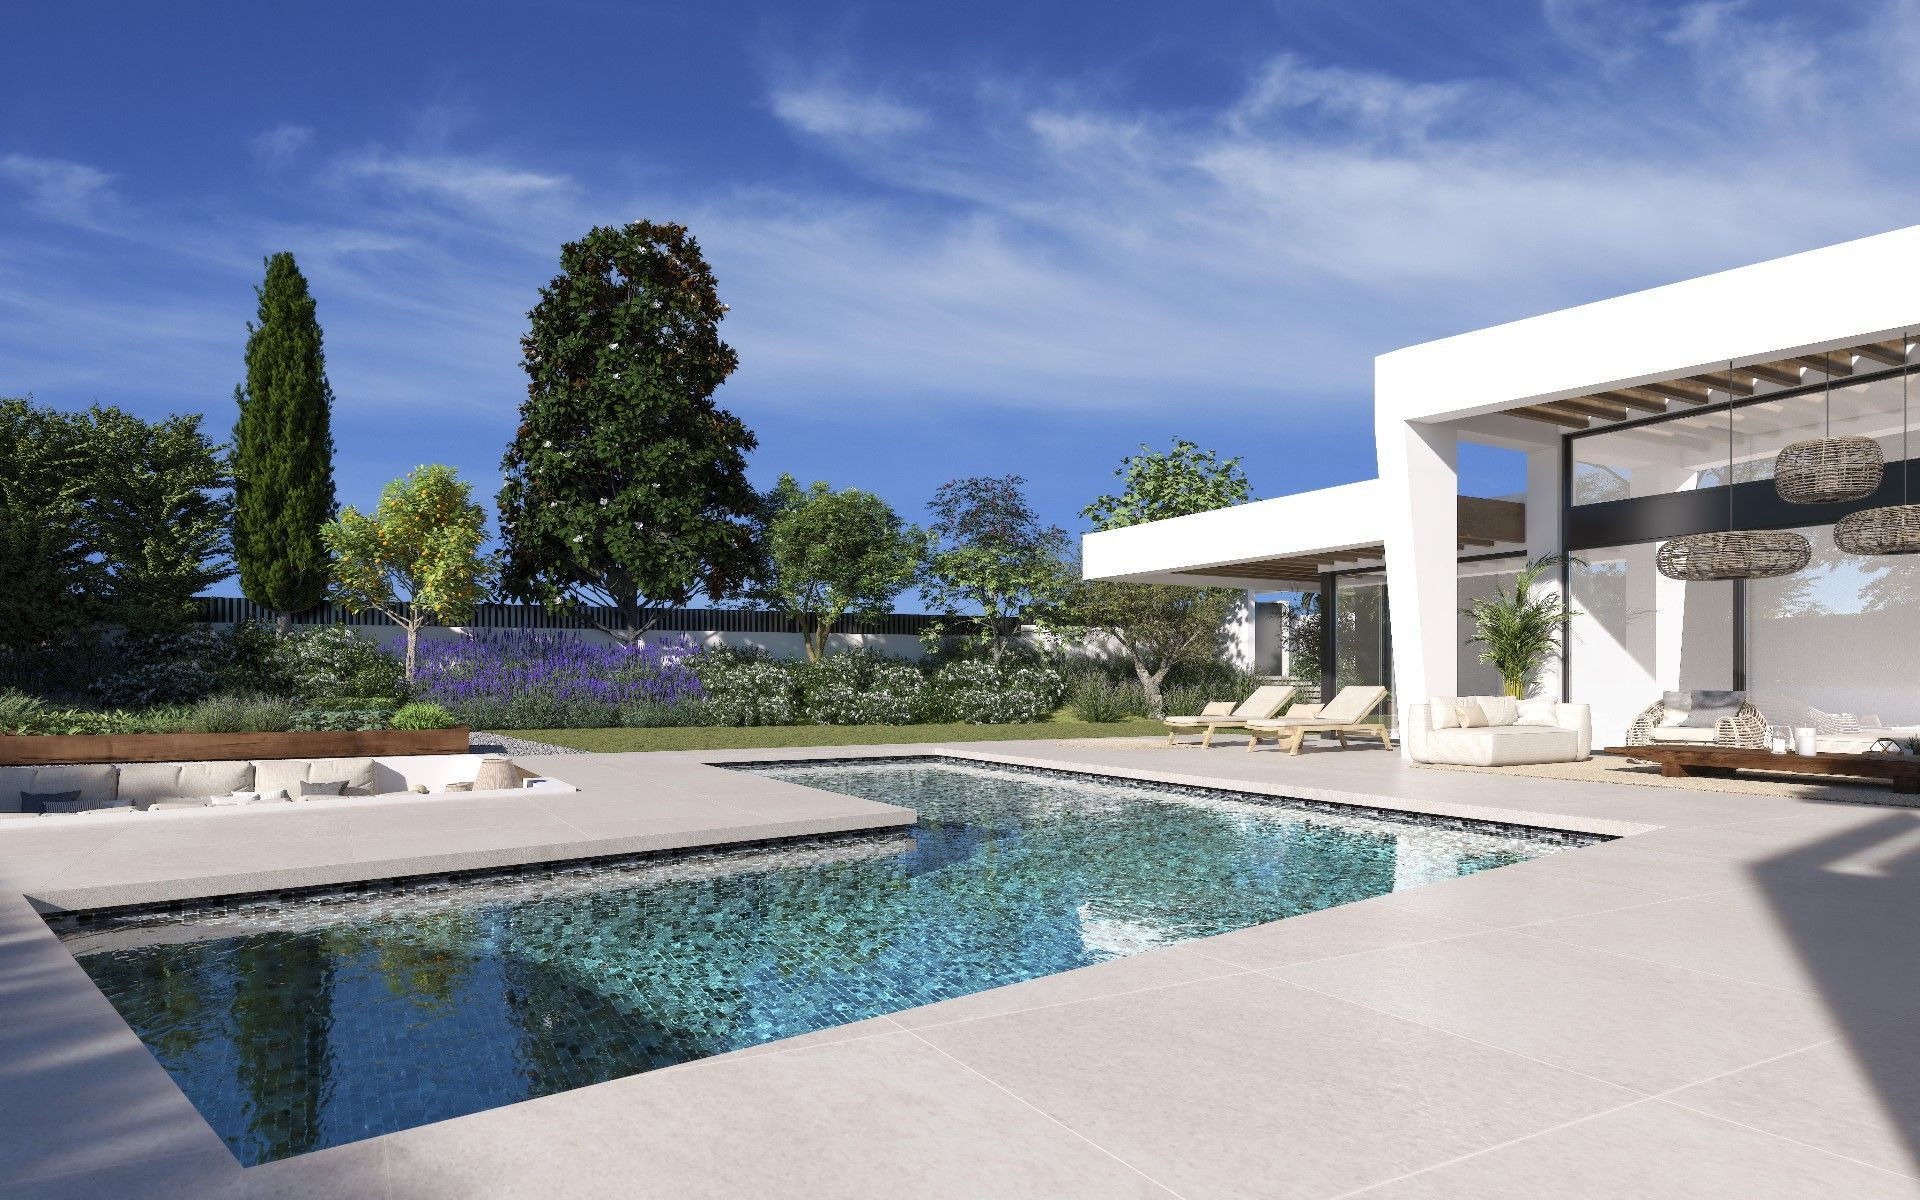 Exclusive project of 3 contemporary-style luxury villas on one floor in the heart of the Golf Valley.